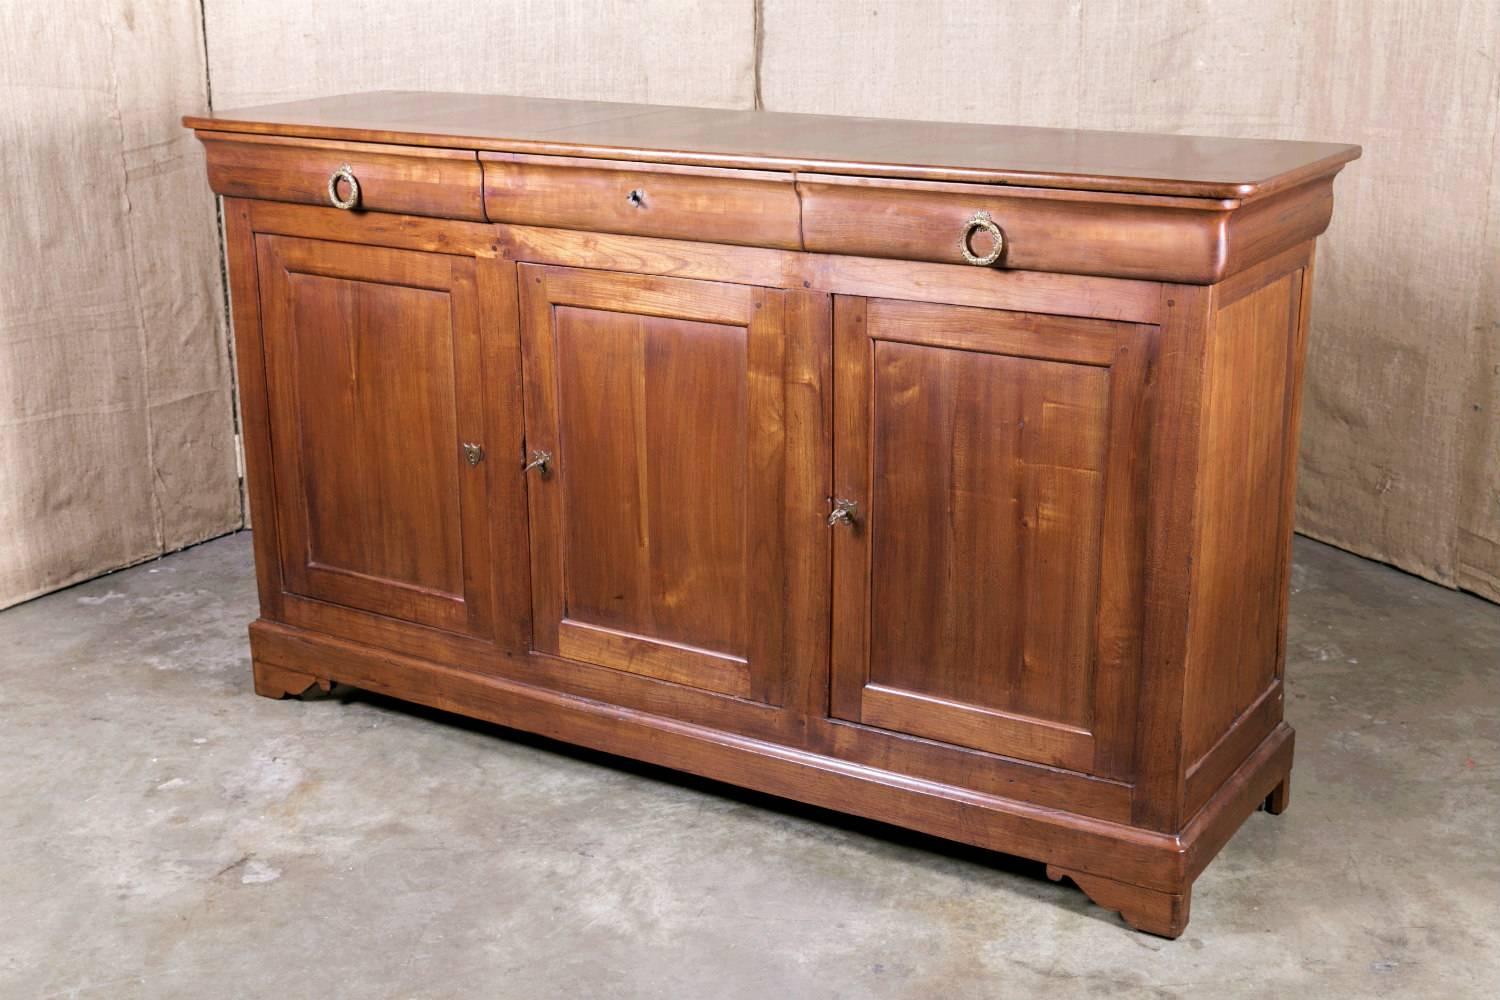 French Louis Philippe period enfilade handcrafted of solid cherry by skilled artisans in the Brittany region, having three doucine drawers over three paneled doors with original bronze pulls. Resting on shaped bracket feet. 

This handsome